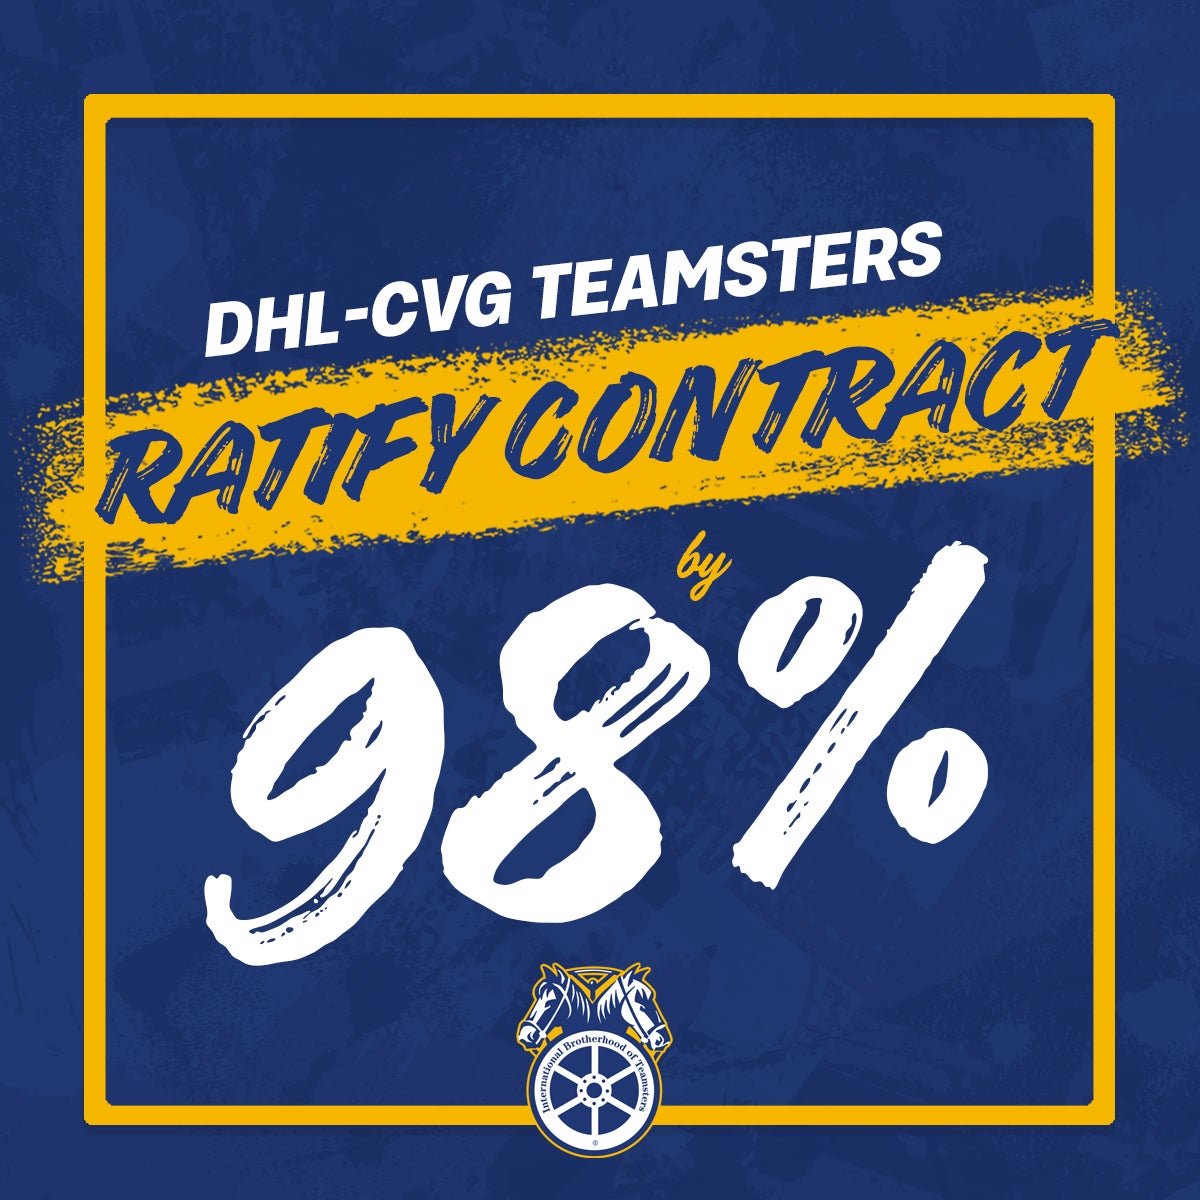 DHLCVG Teamsters Ratify Contract by 98 International Brotherhood of